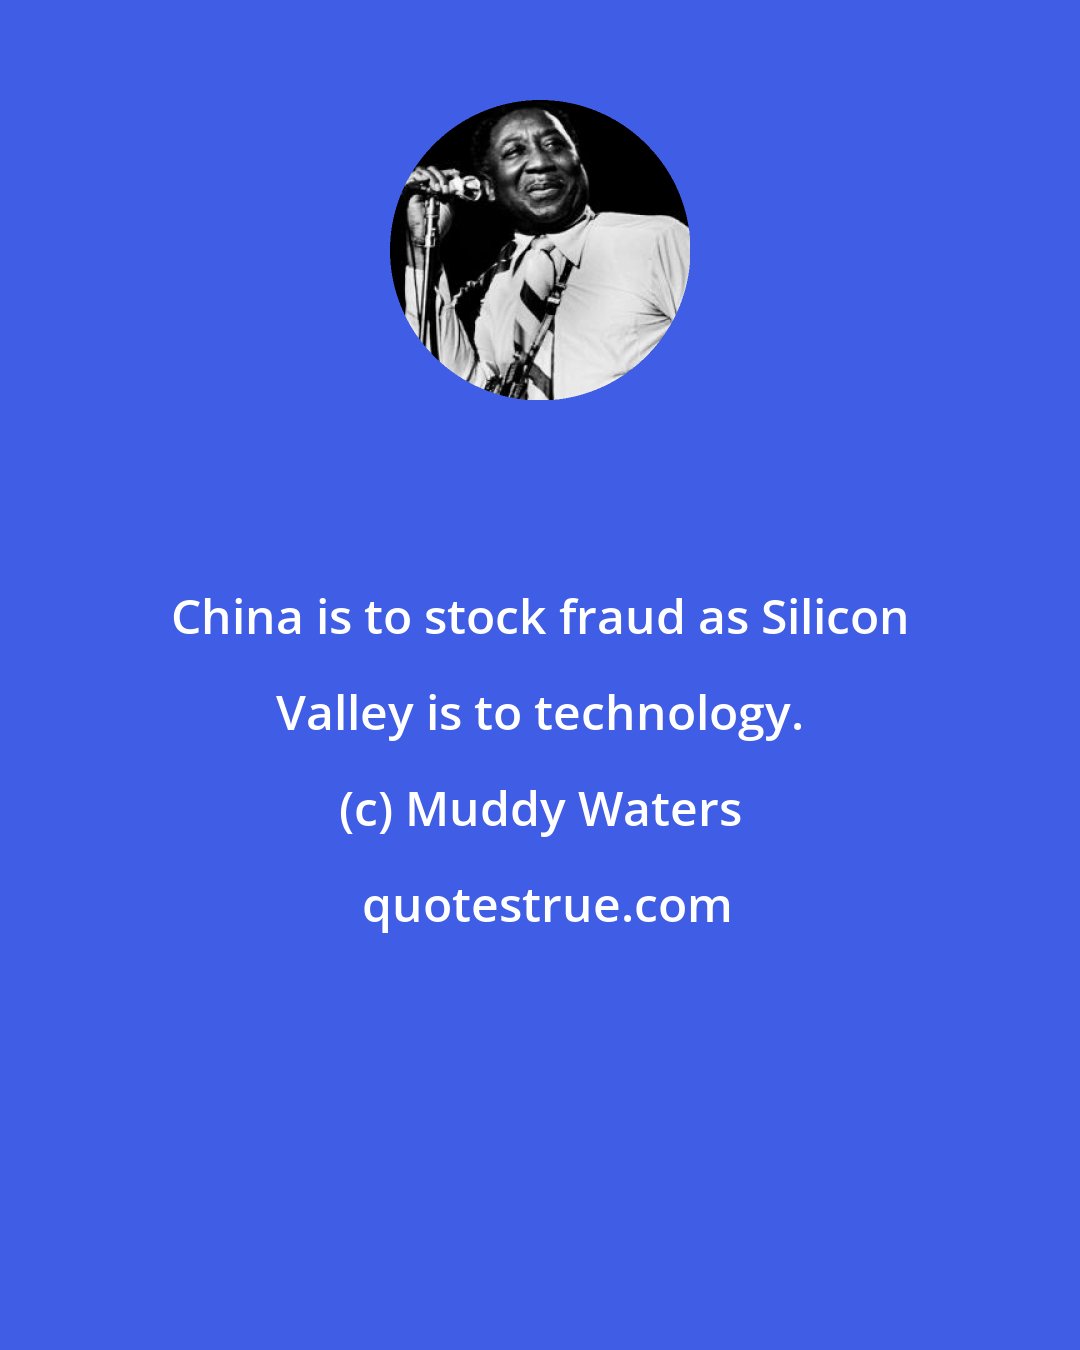 Muddy Waters: China is to stock fraud as Silicon Valley is to technology.